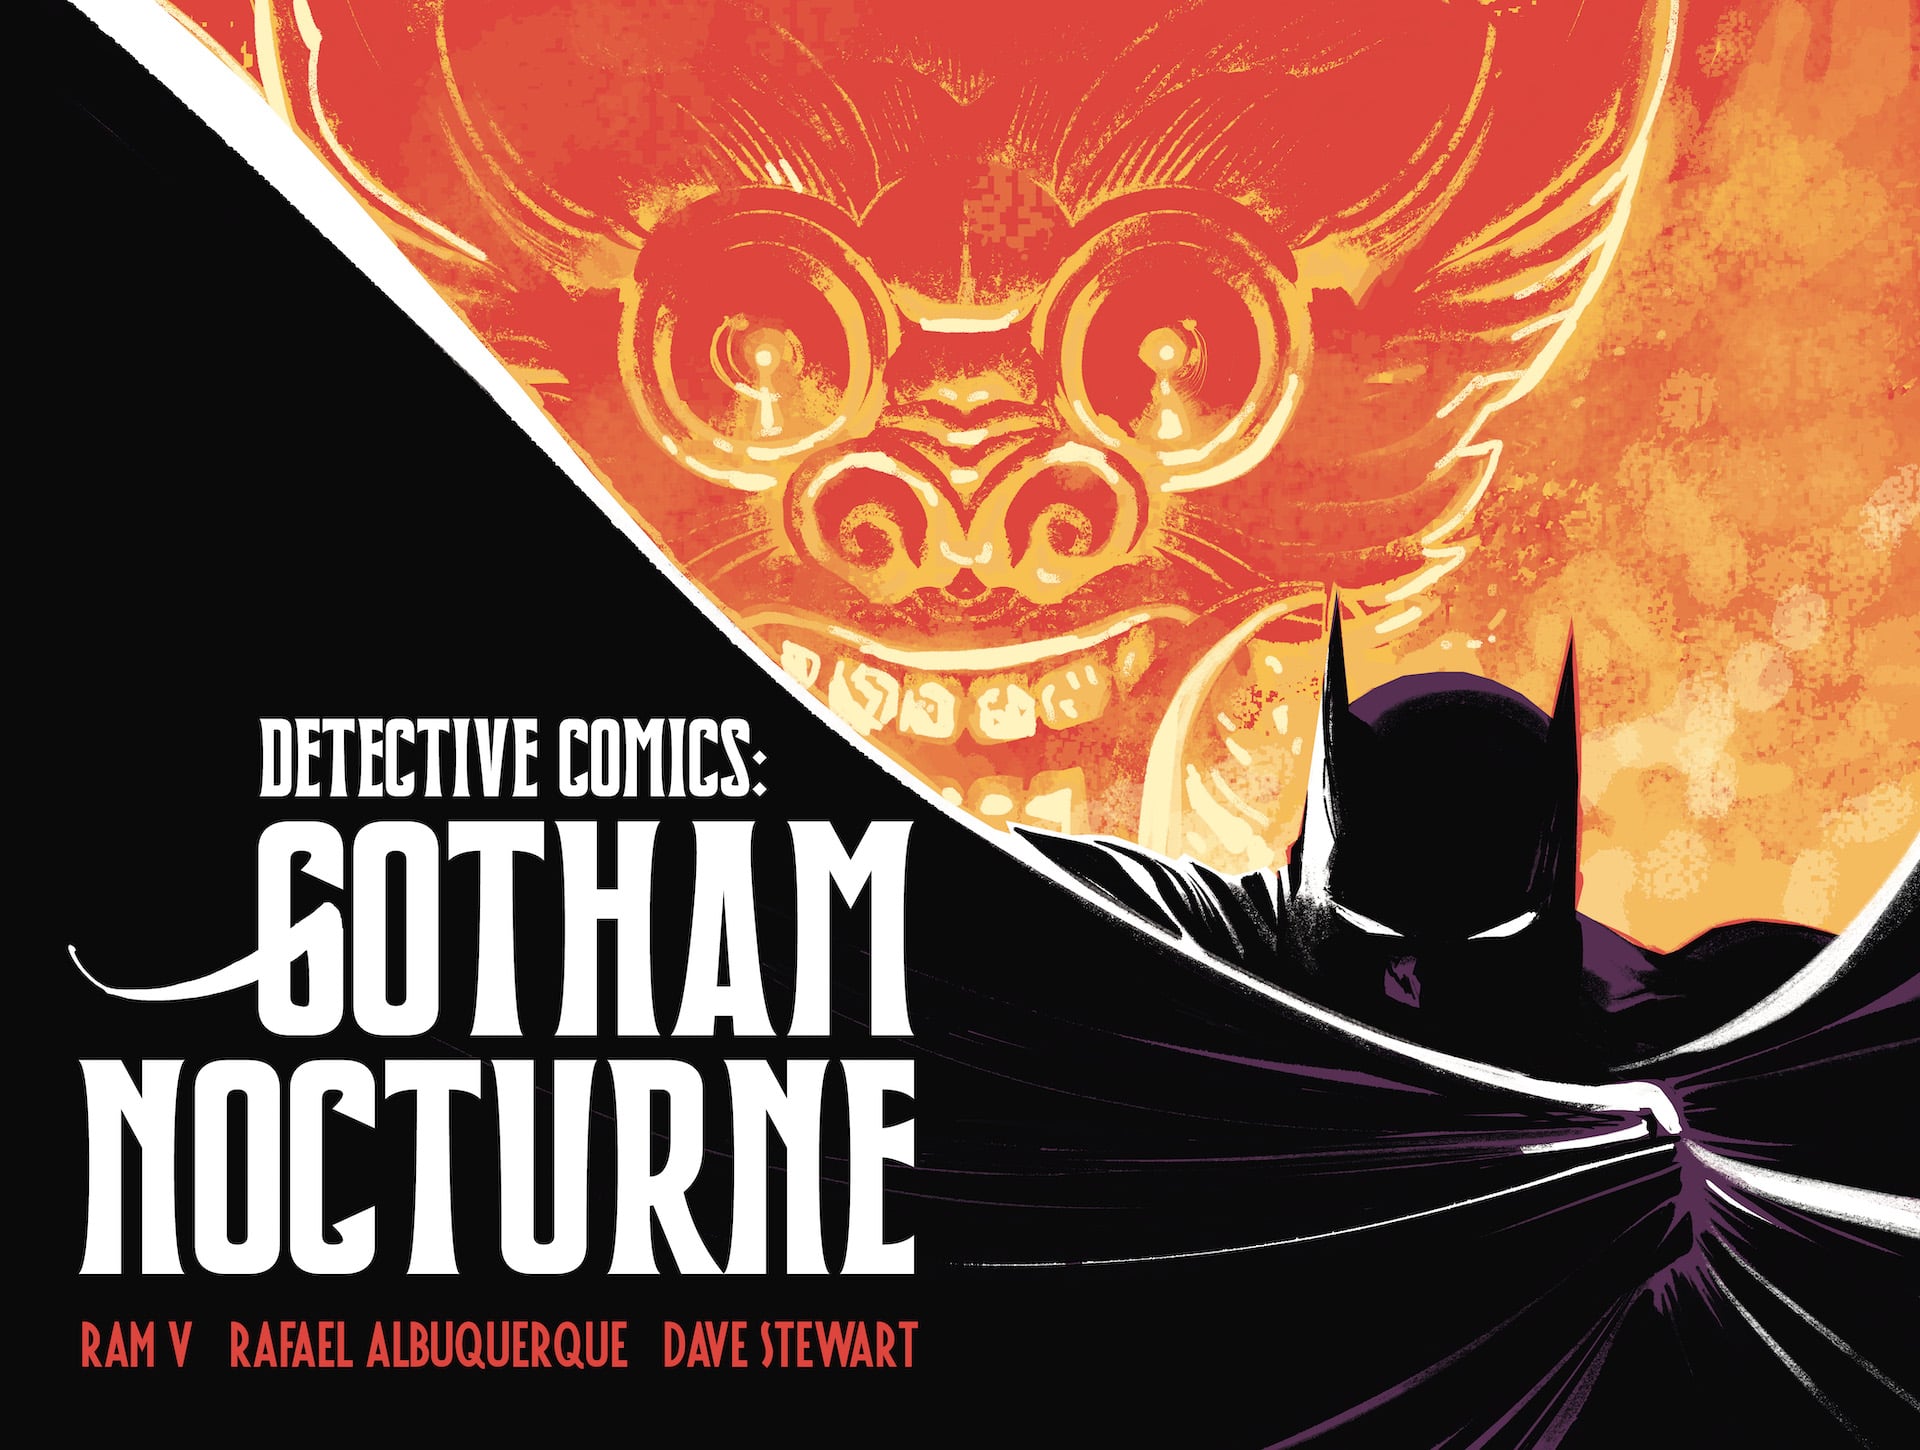 Ram V takes over 'Detective Comics' with Albuquerque in ‘Gotham Nocturne’